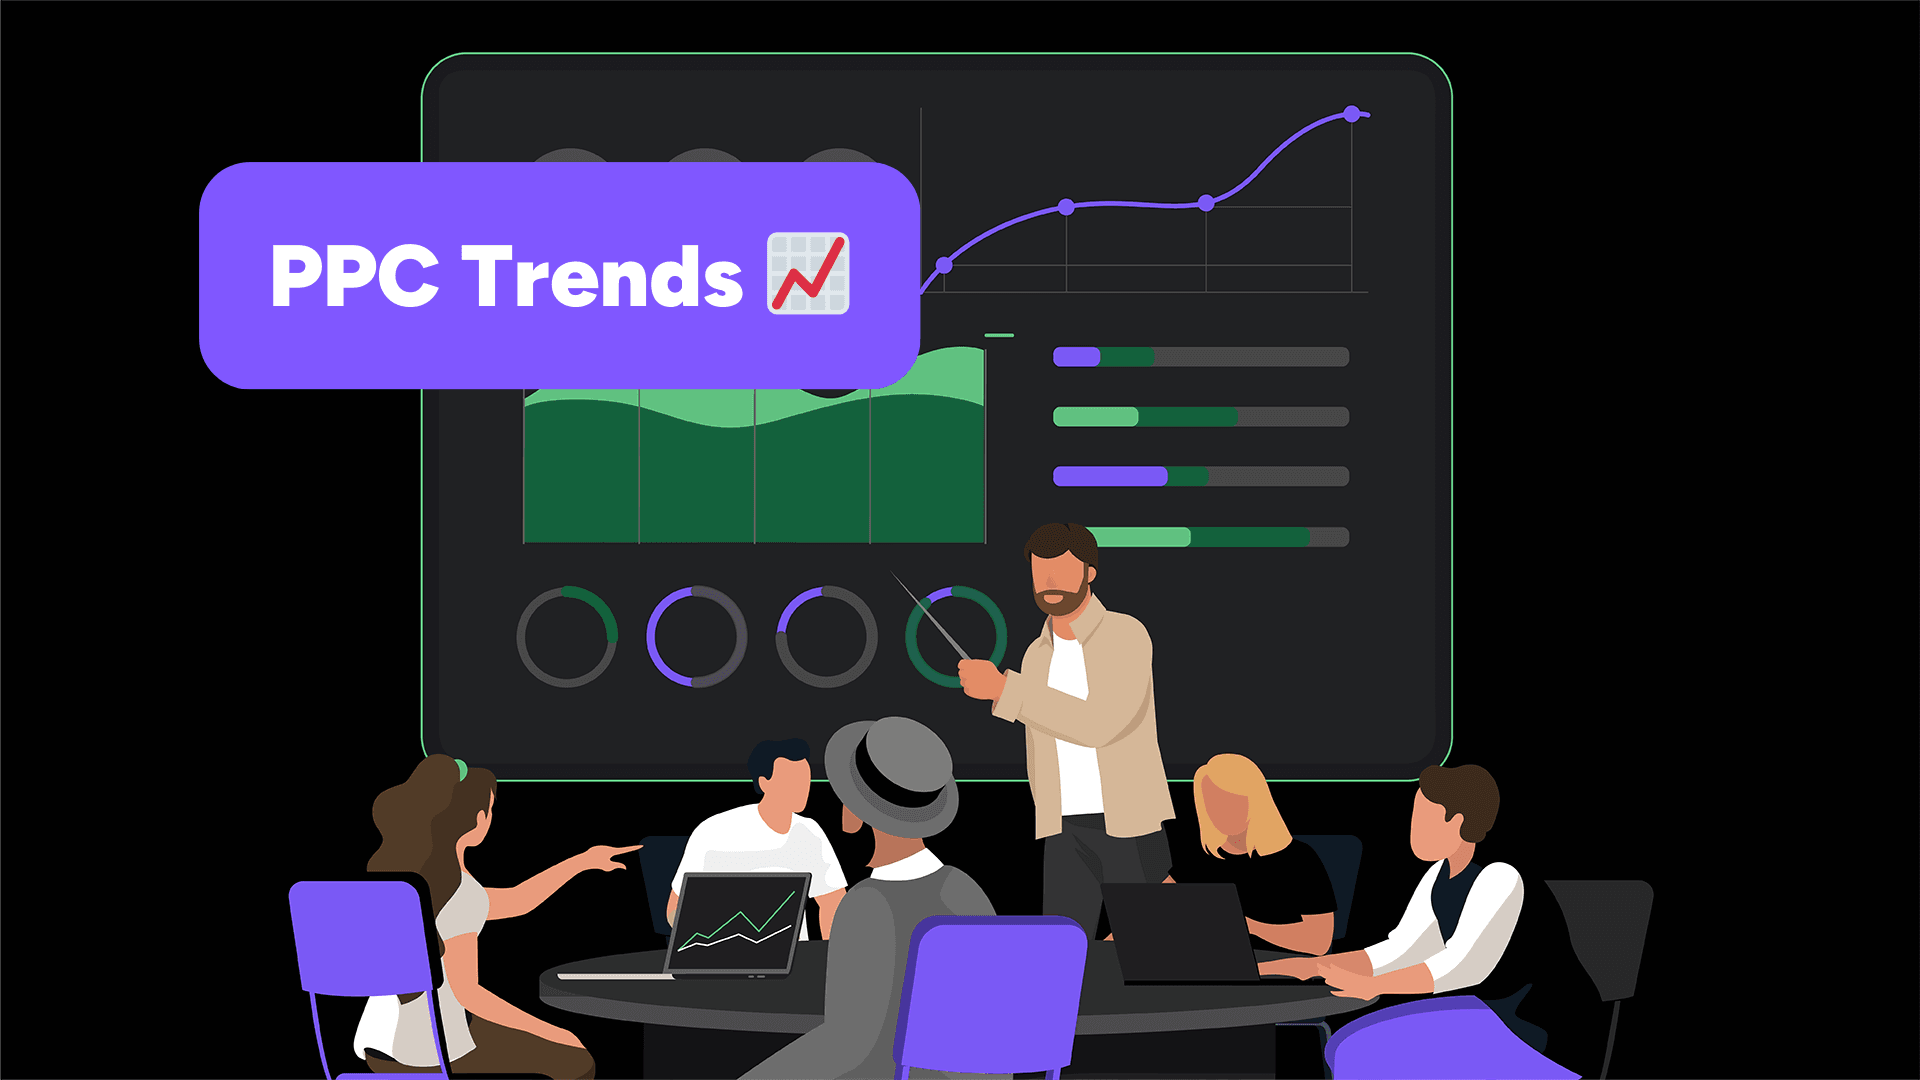 PPC Trends cover image